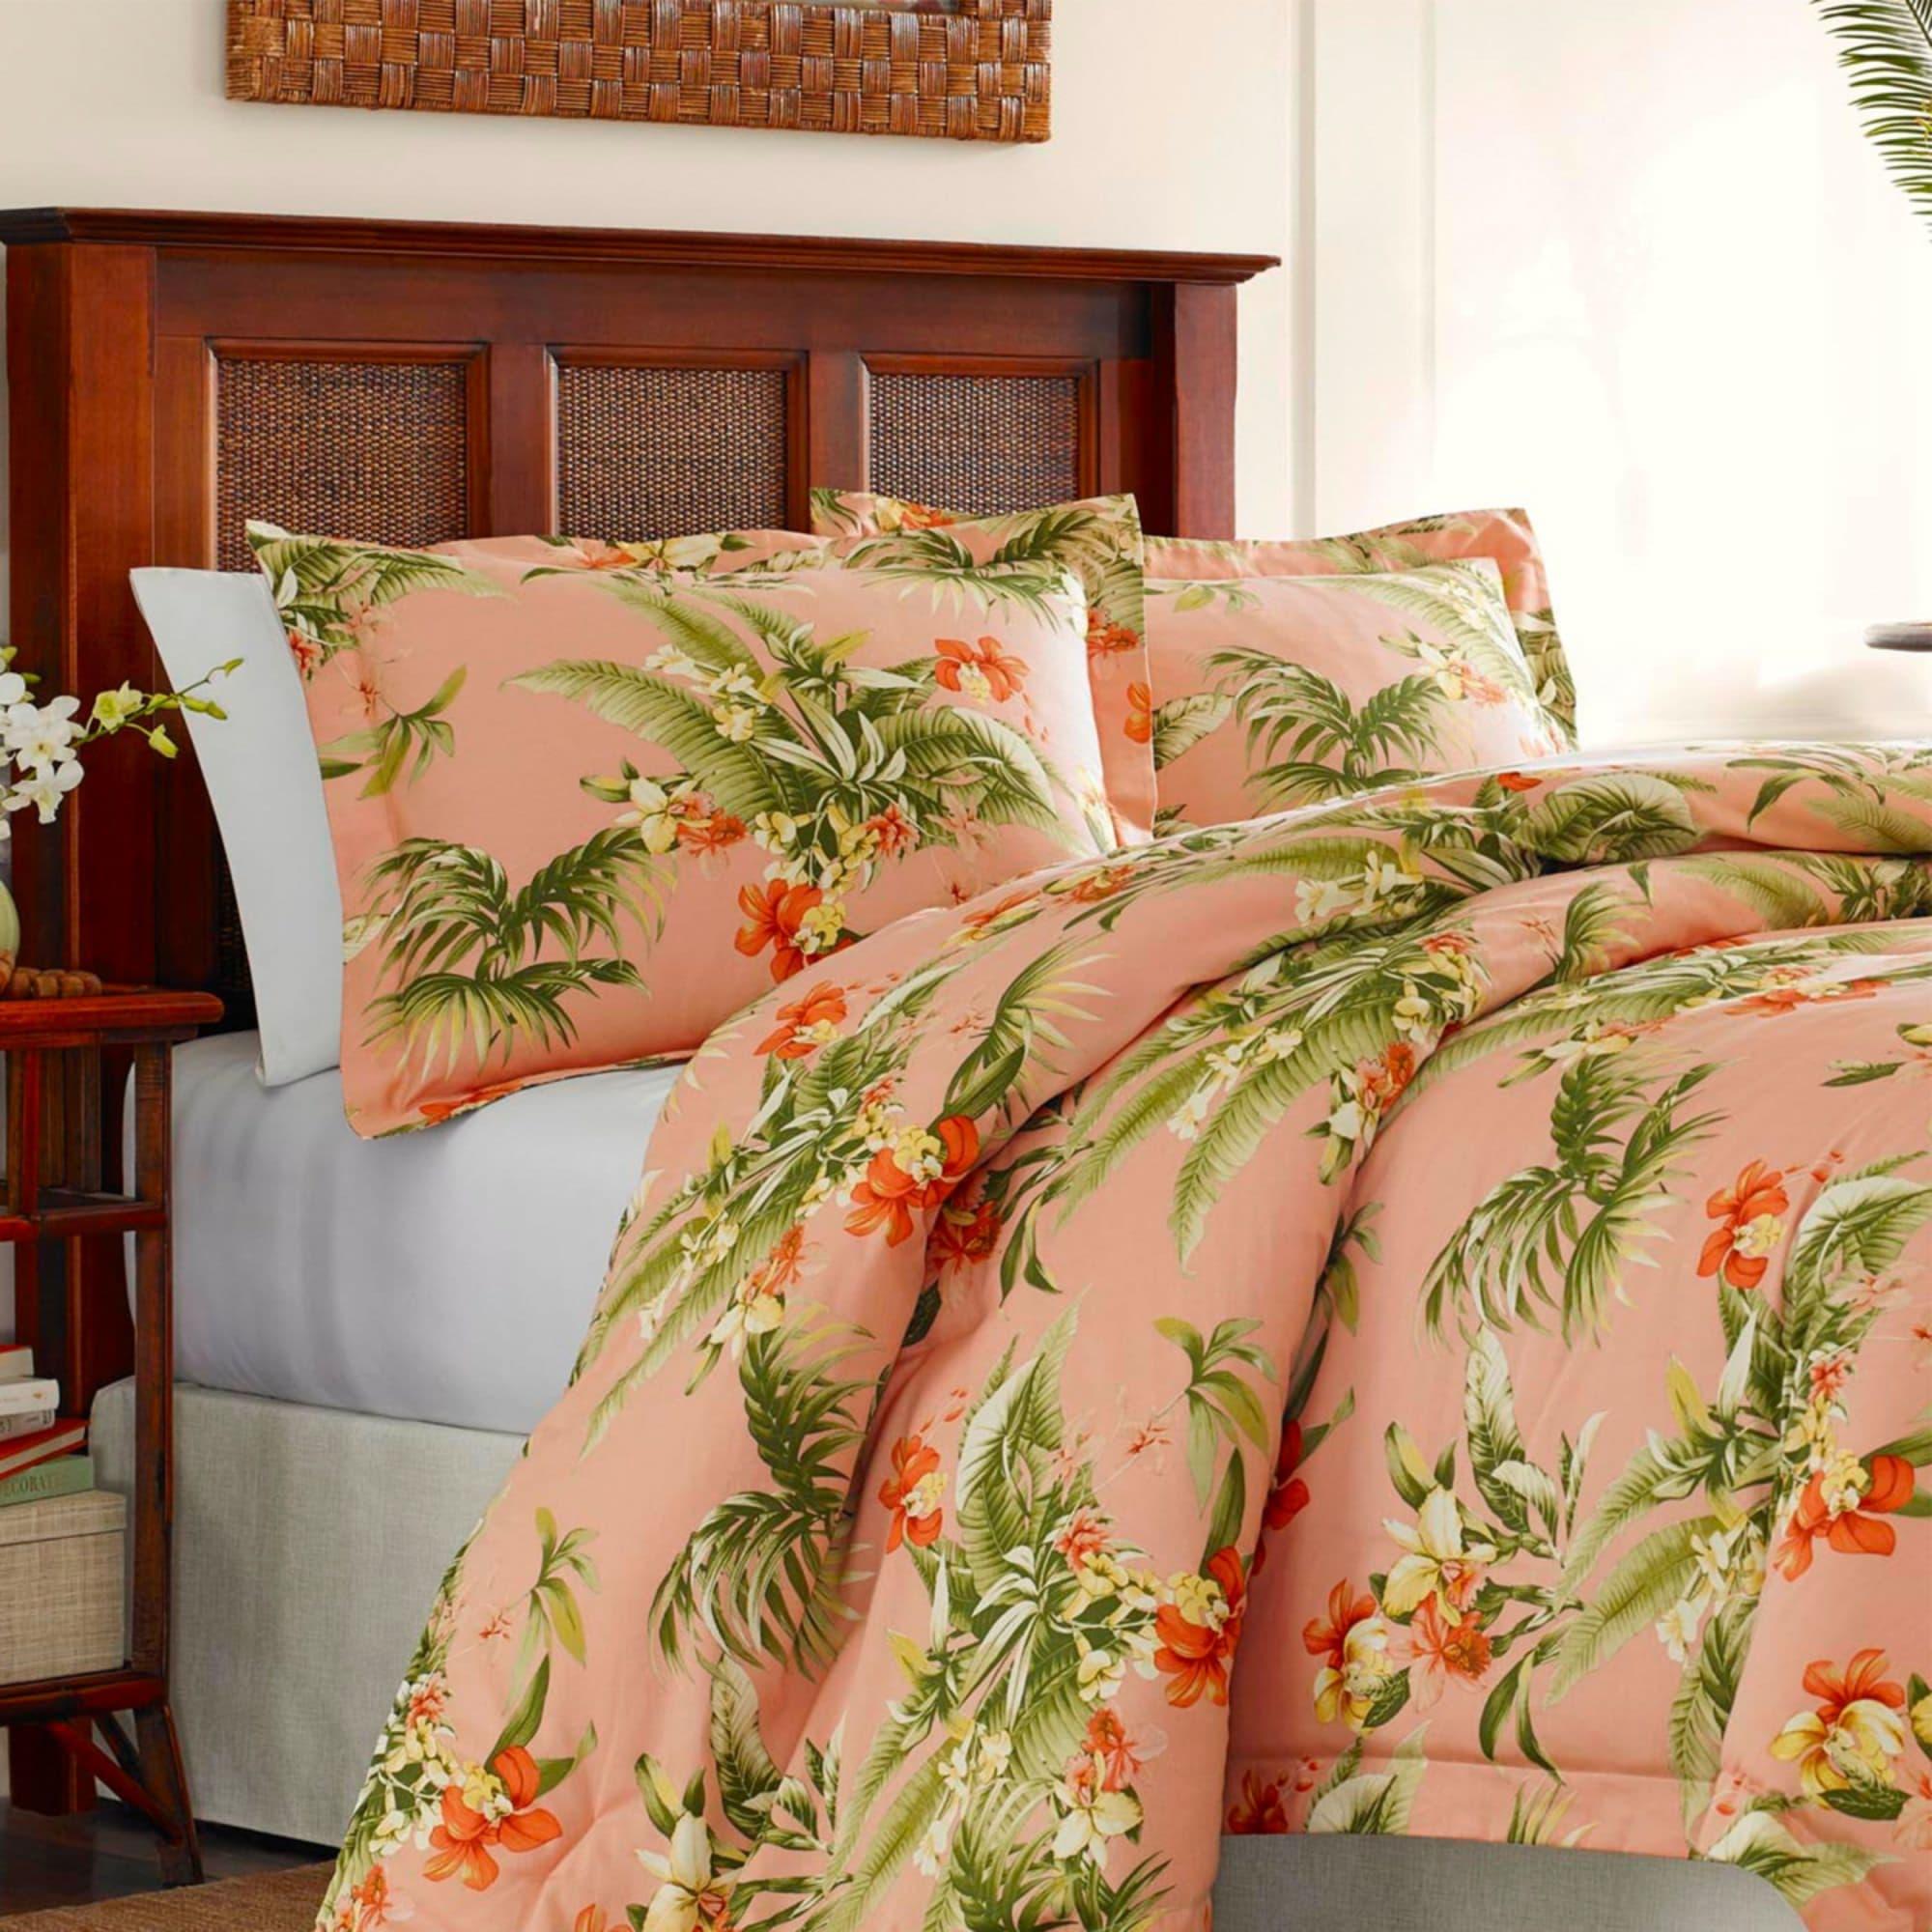 Tommy Bahama Siesta Key Quilt Cover Set Queen Image 4